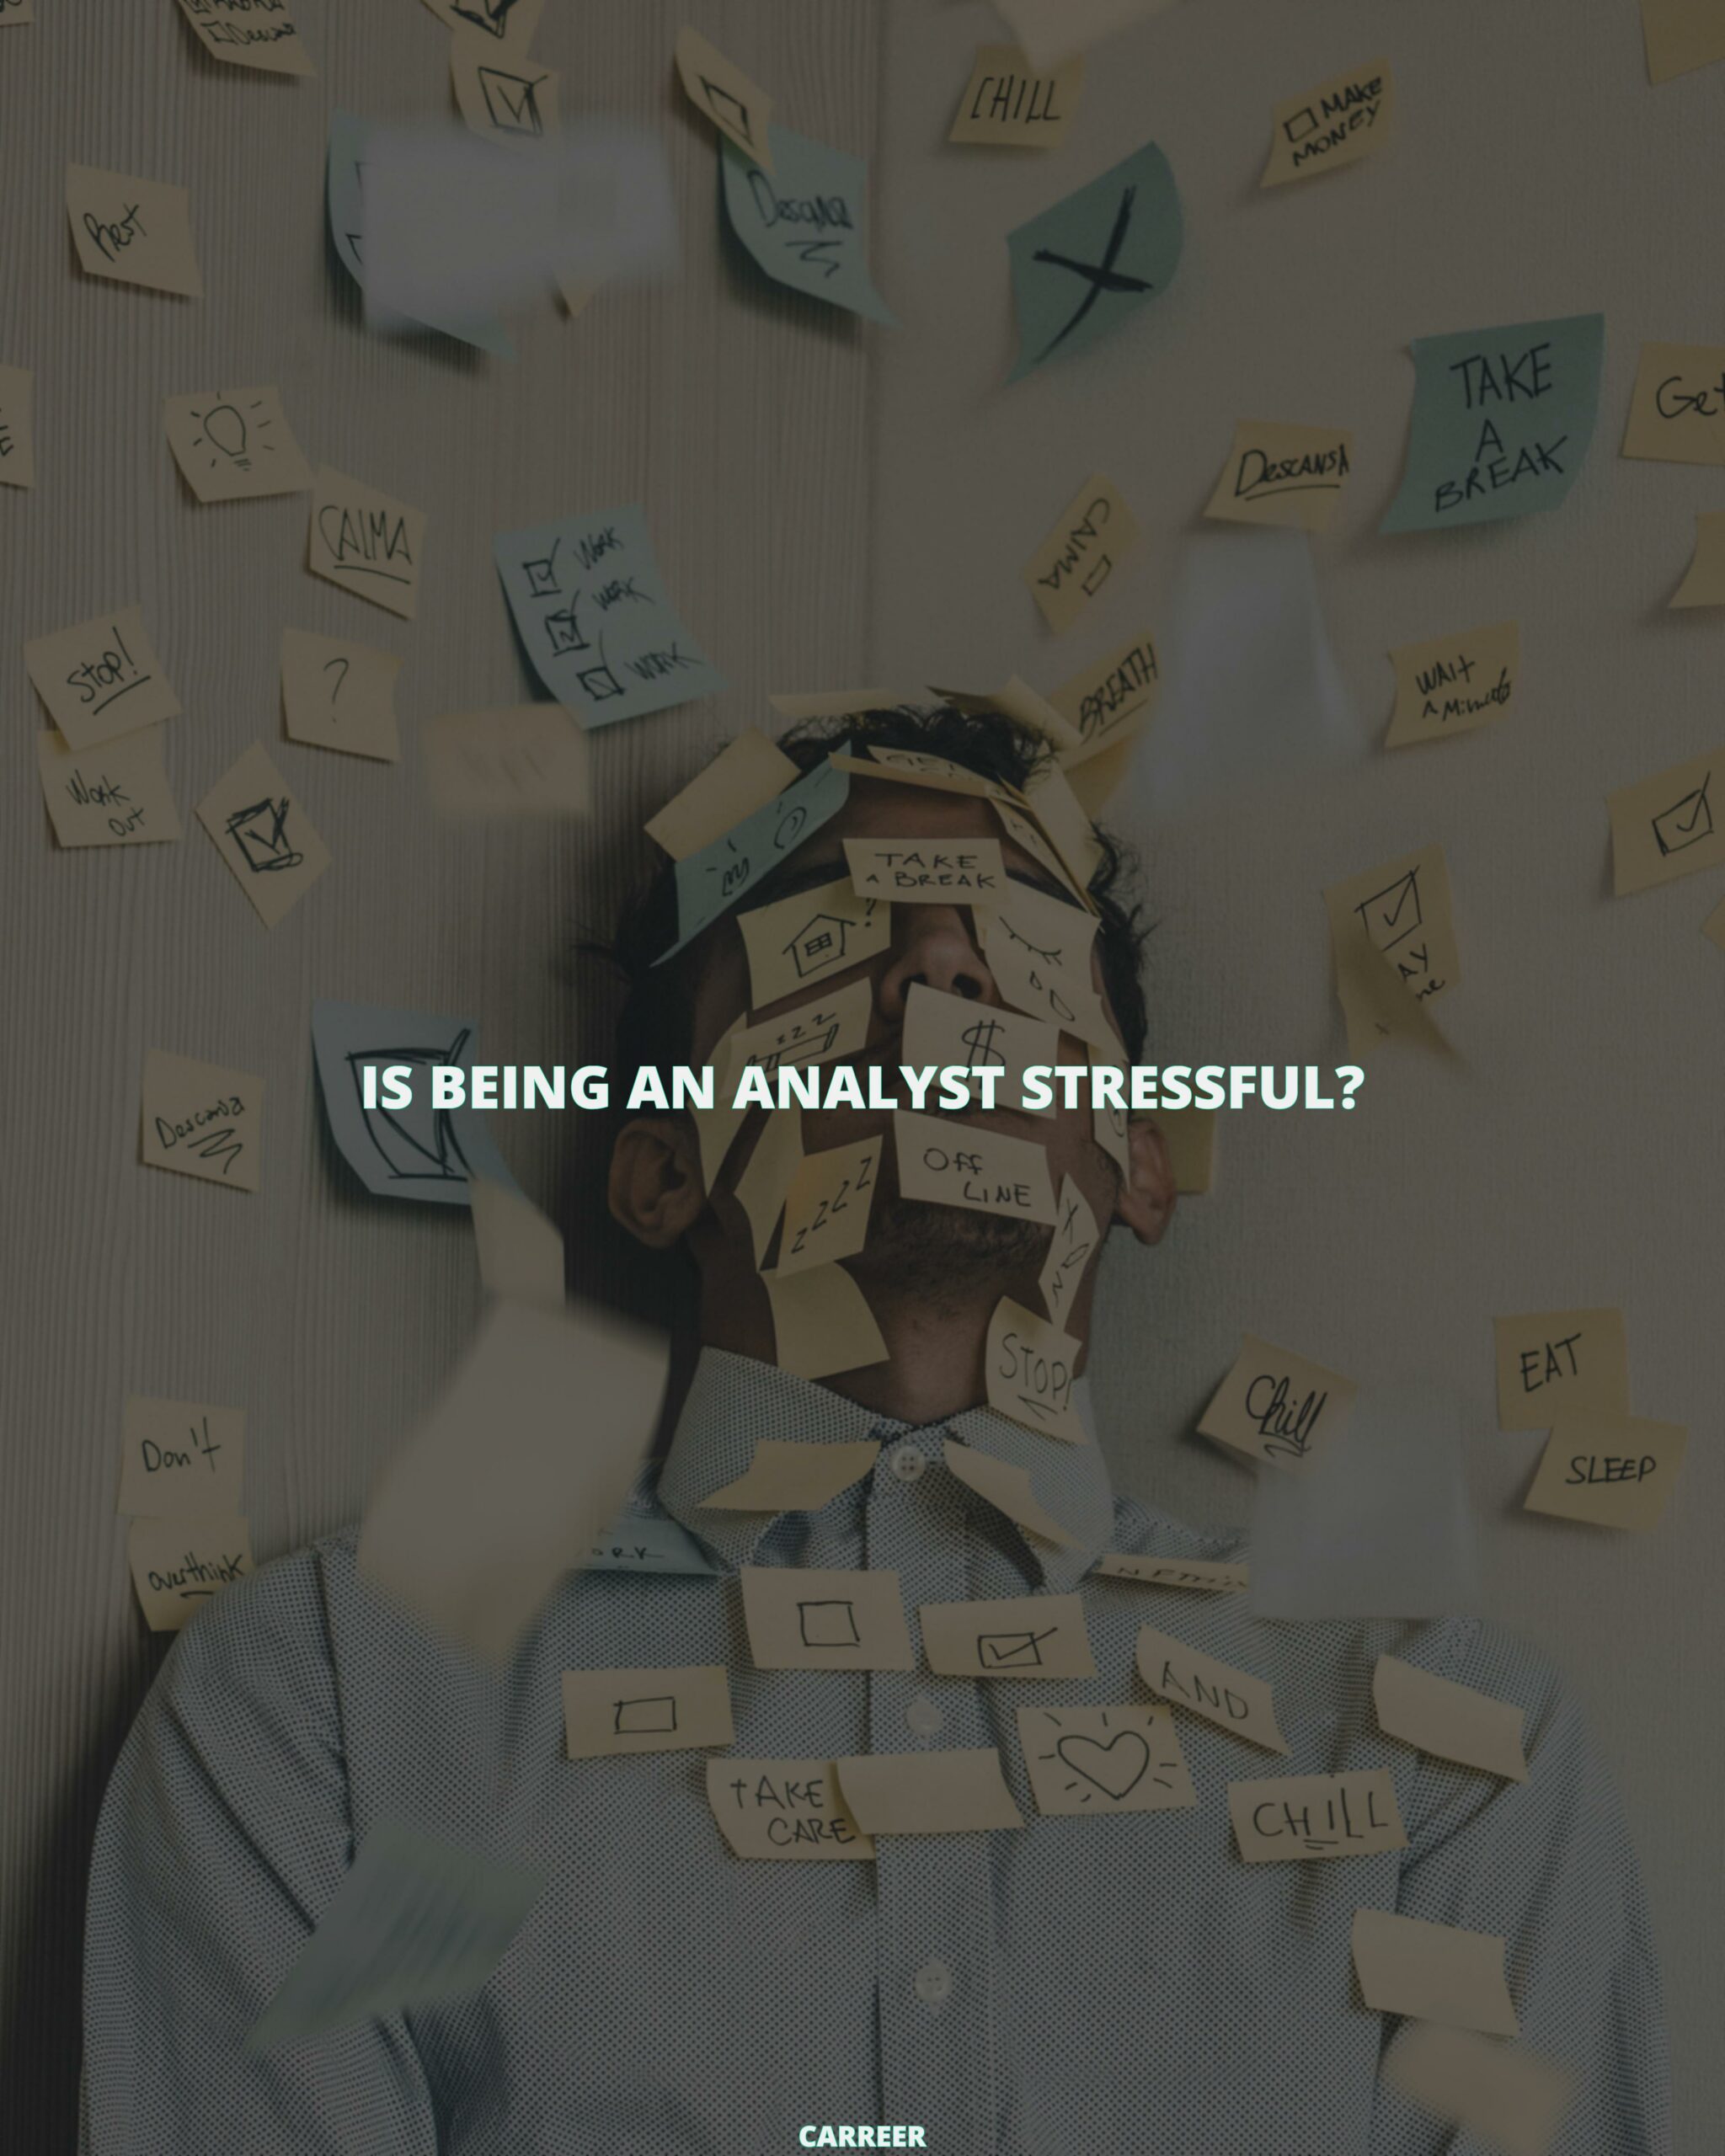 Is being an analyst stressful?